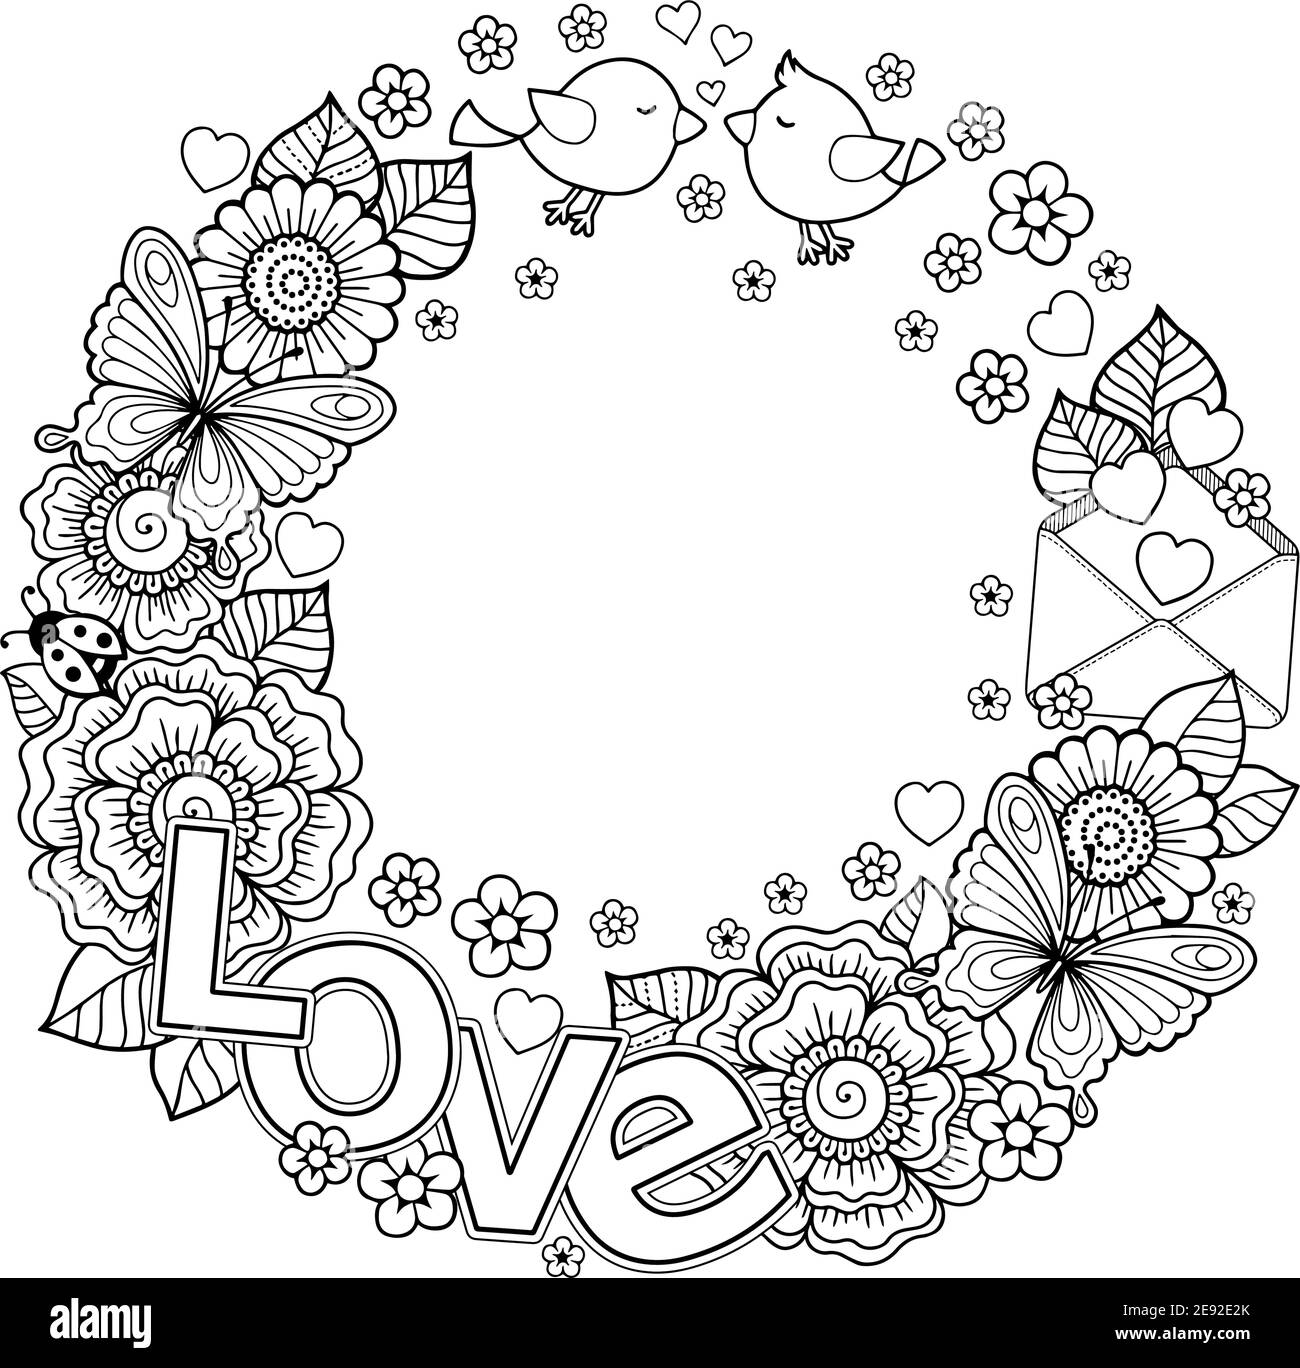 Vector coloring book for adult design for wedding invitations and valentines day of abstract flowers hearts envelope arrow heart bird kiss bu stock vector image art